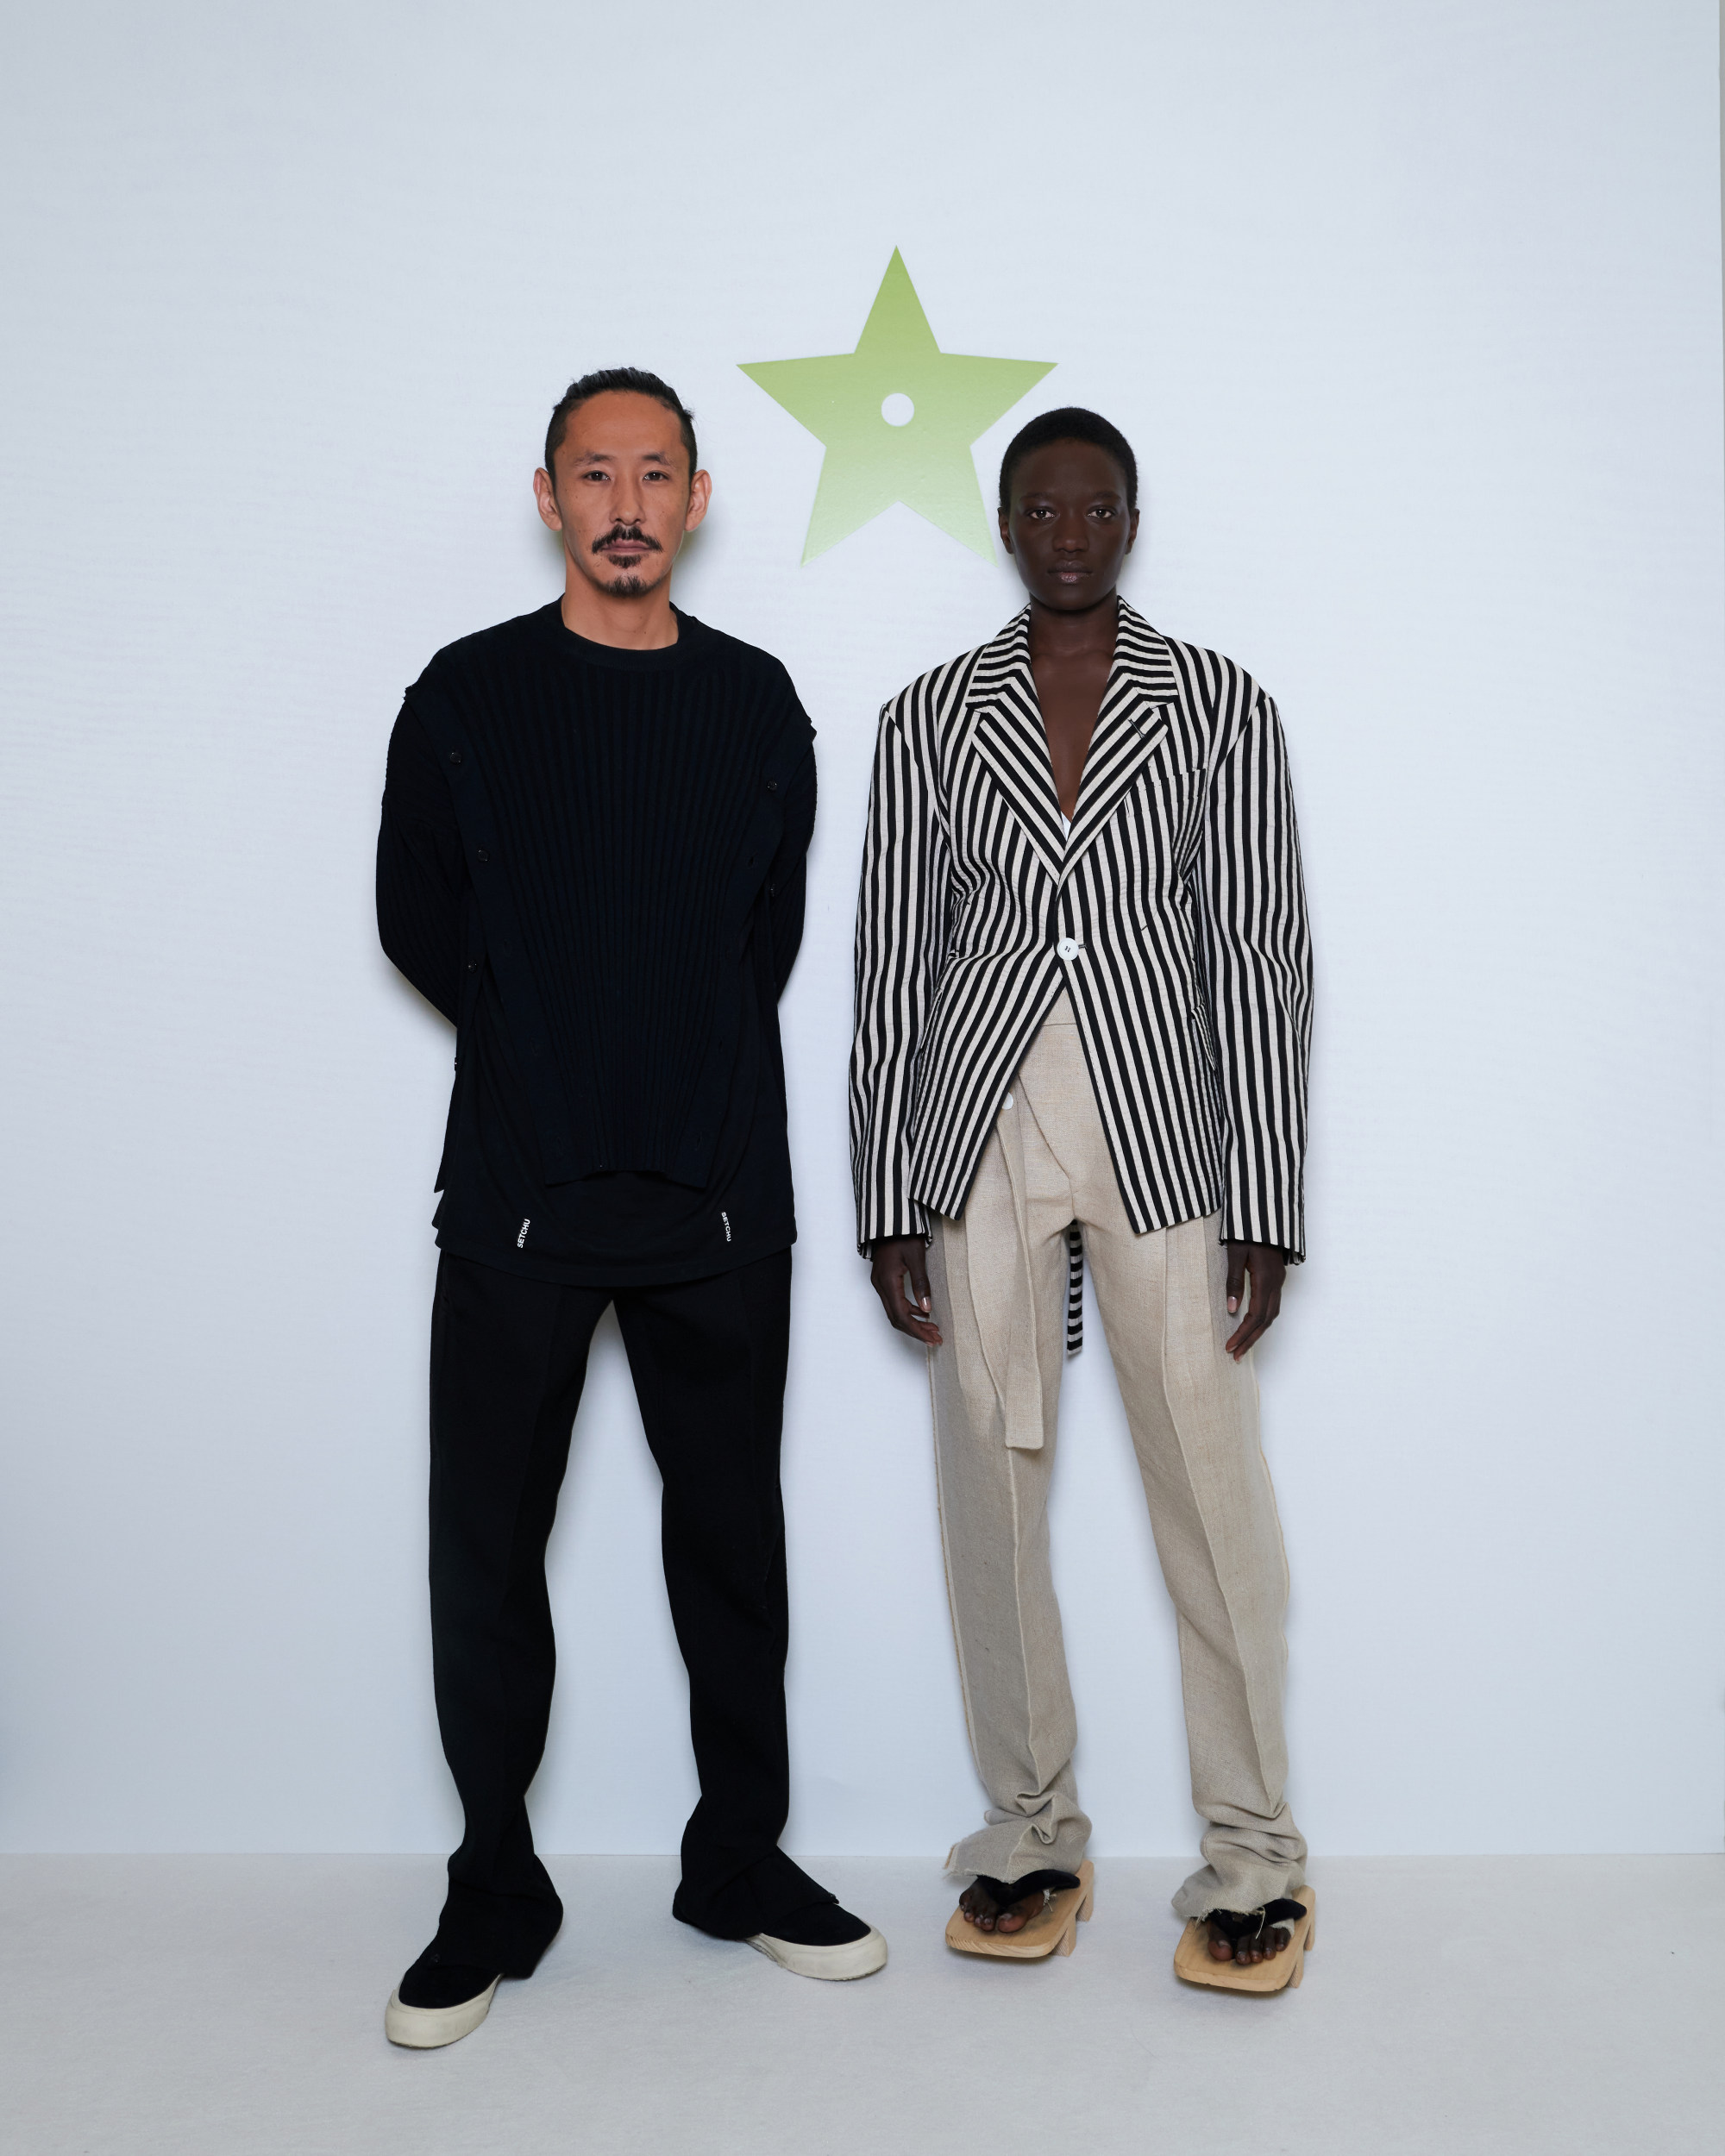 Emerging Designers Shine: Setchu by Satoshi Kuwata Takes Top Honors at 2023  LVMH Prize taking home a 400,000 Euros prize. – A Shaded View on Fashion